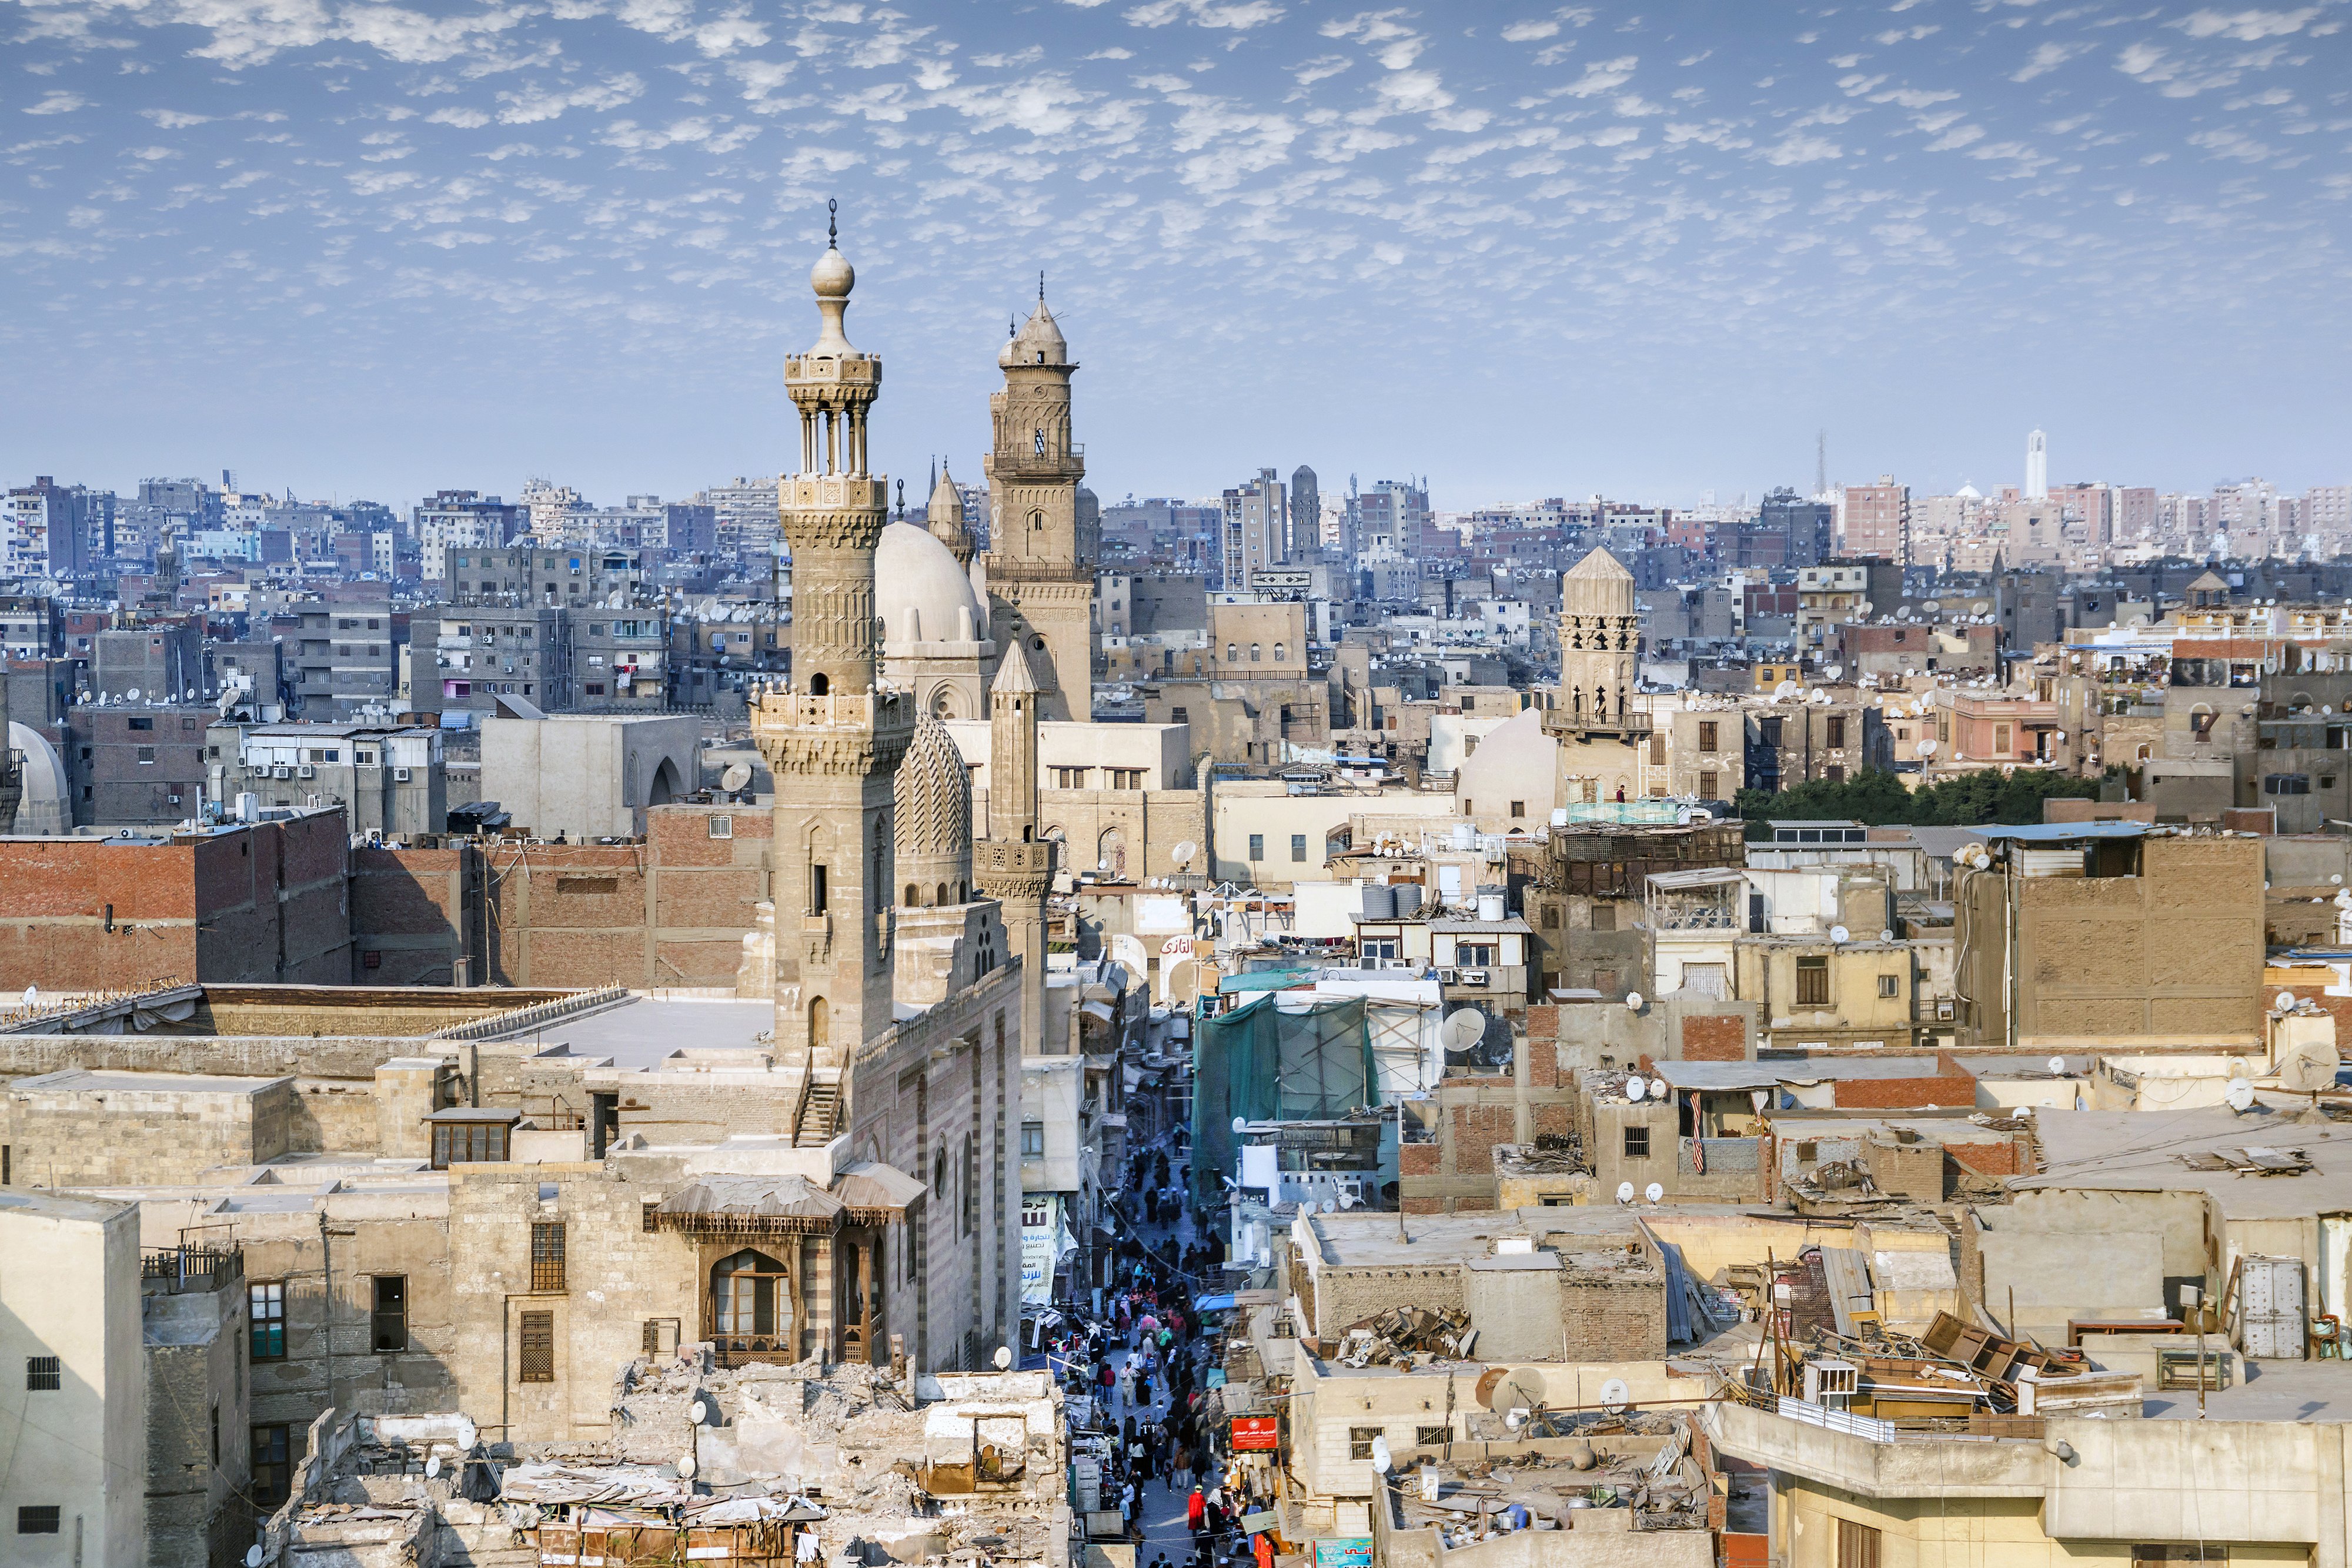 Aerial view of Al-Muizz street of Islamic Cairo with mosques, palaces and residential buildings from the minaret of Sultan Al-Ghuri Mosque-Madrasa, Cairo, Egypt